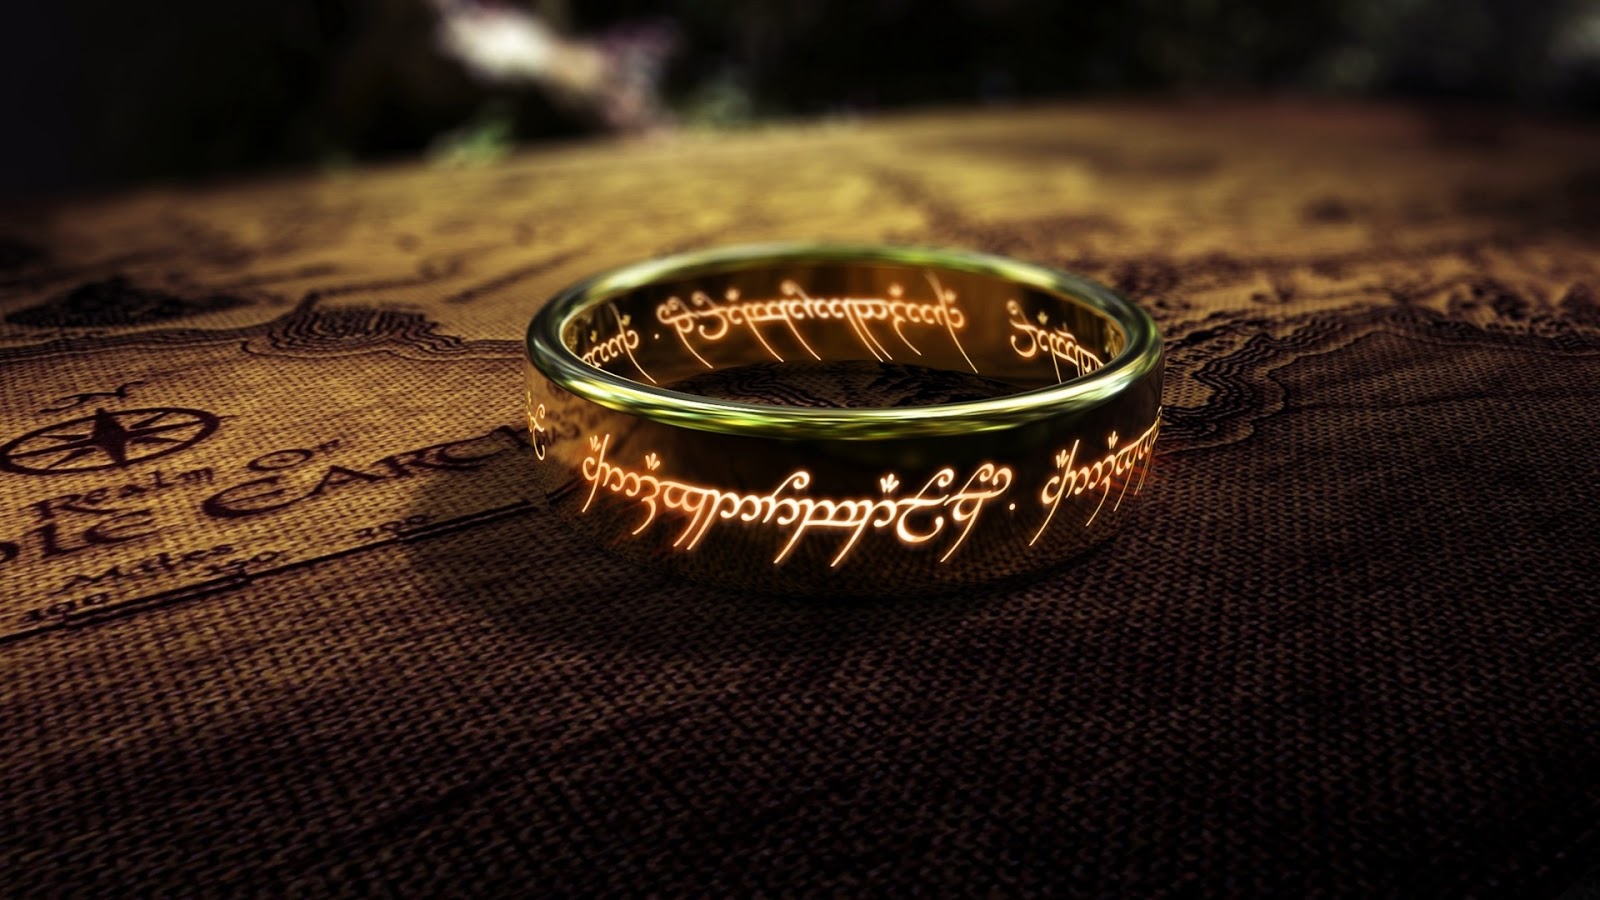 The Lord Of The Rings Wallpaper Covers Heat 1600x900